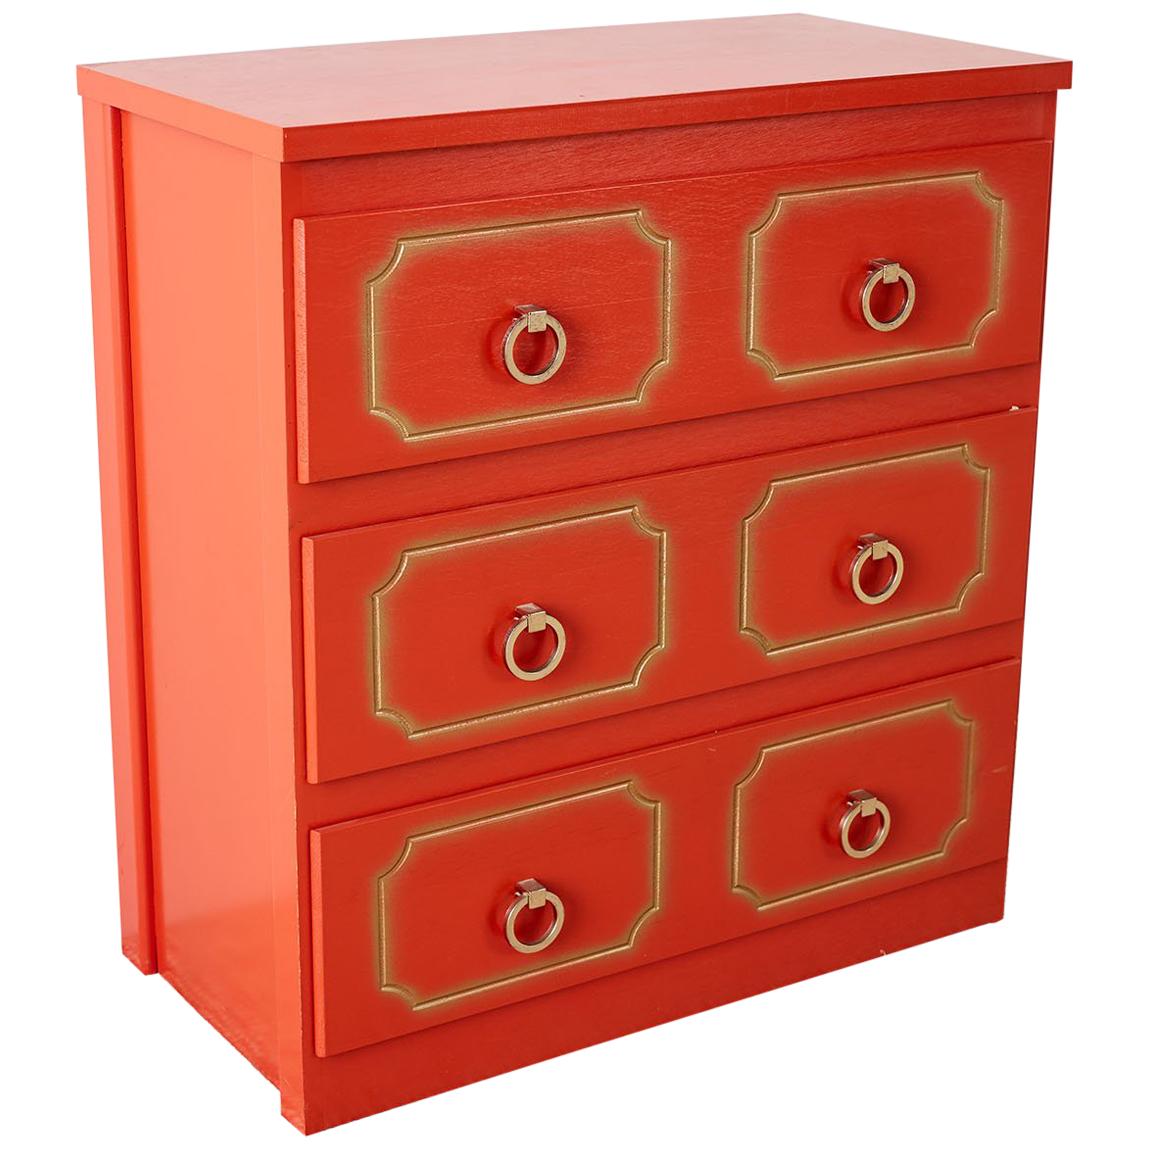 Dorothy Draper Style Coral Red Commode or Chest